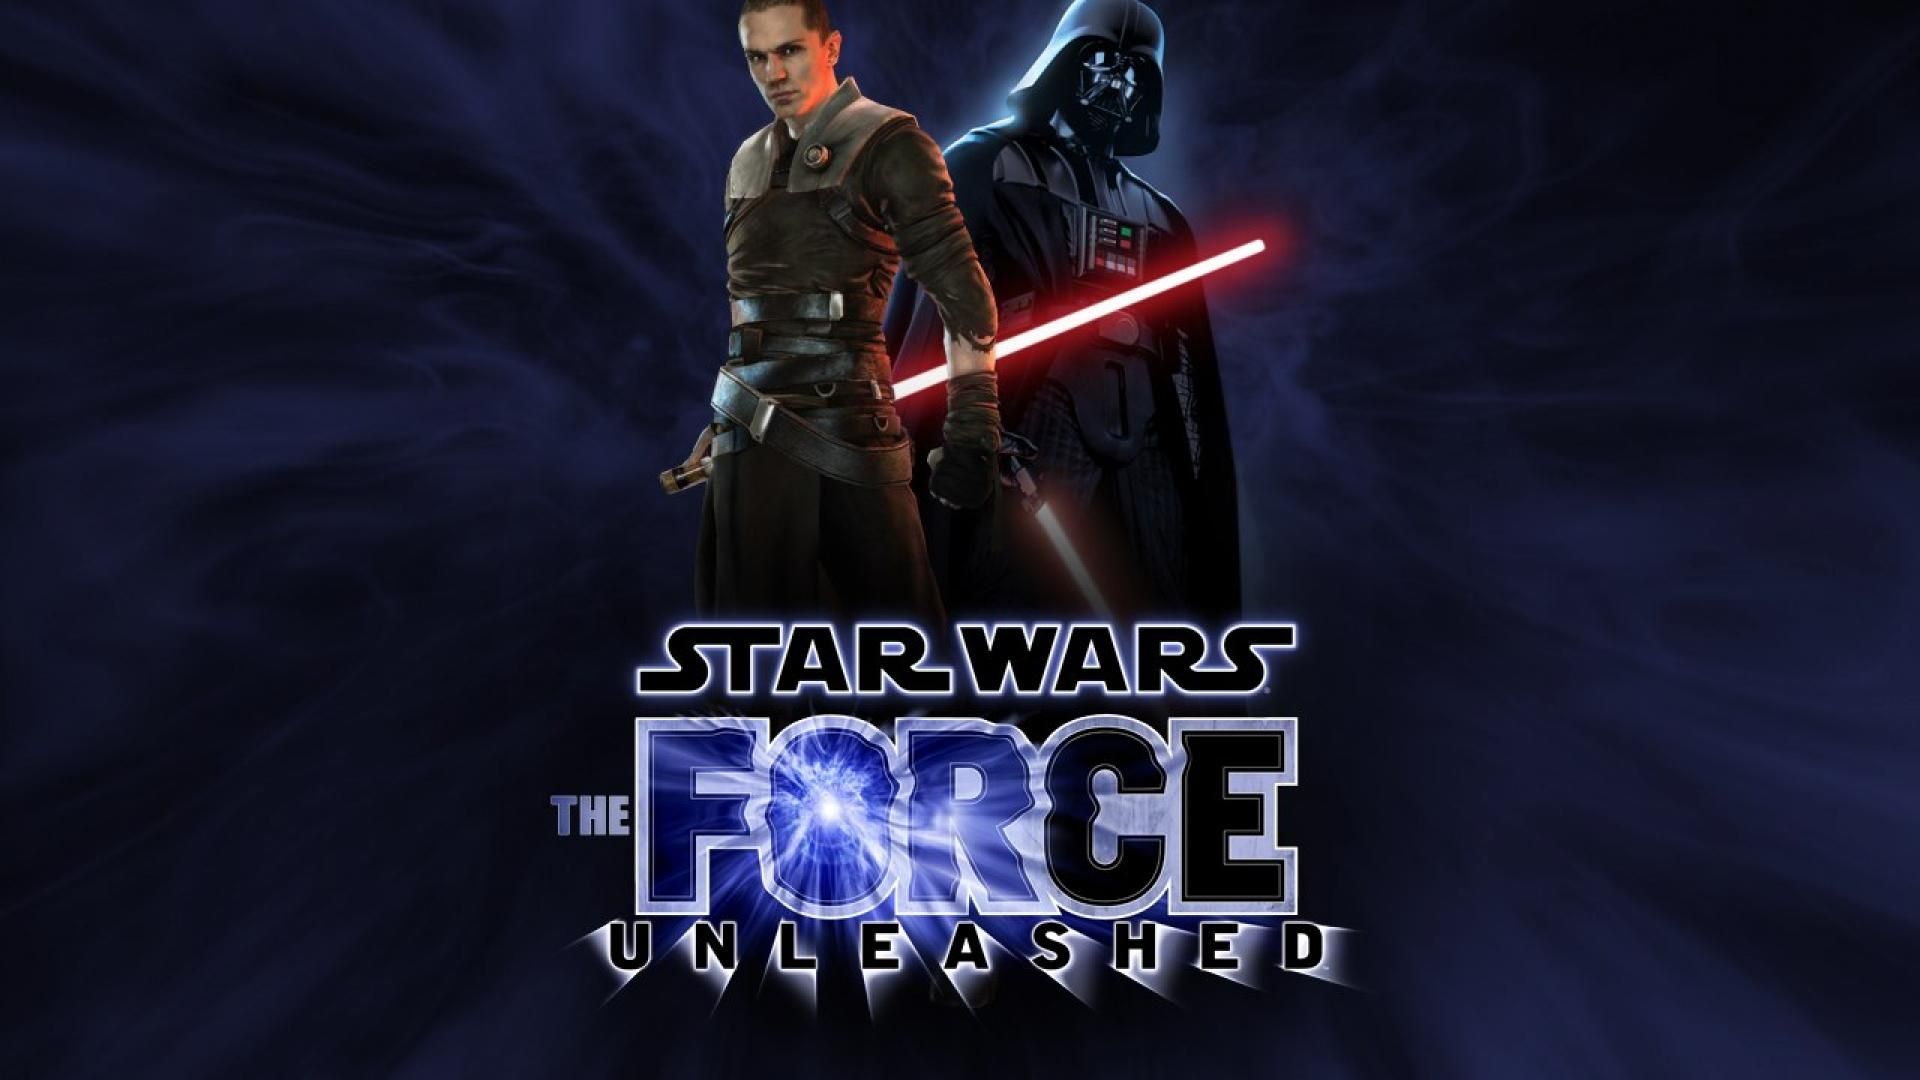 darth vader star wars the force unleashed games HD wallpaper